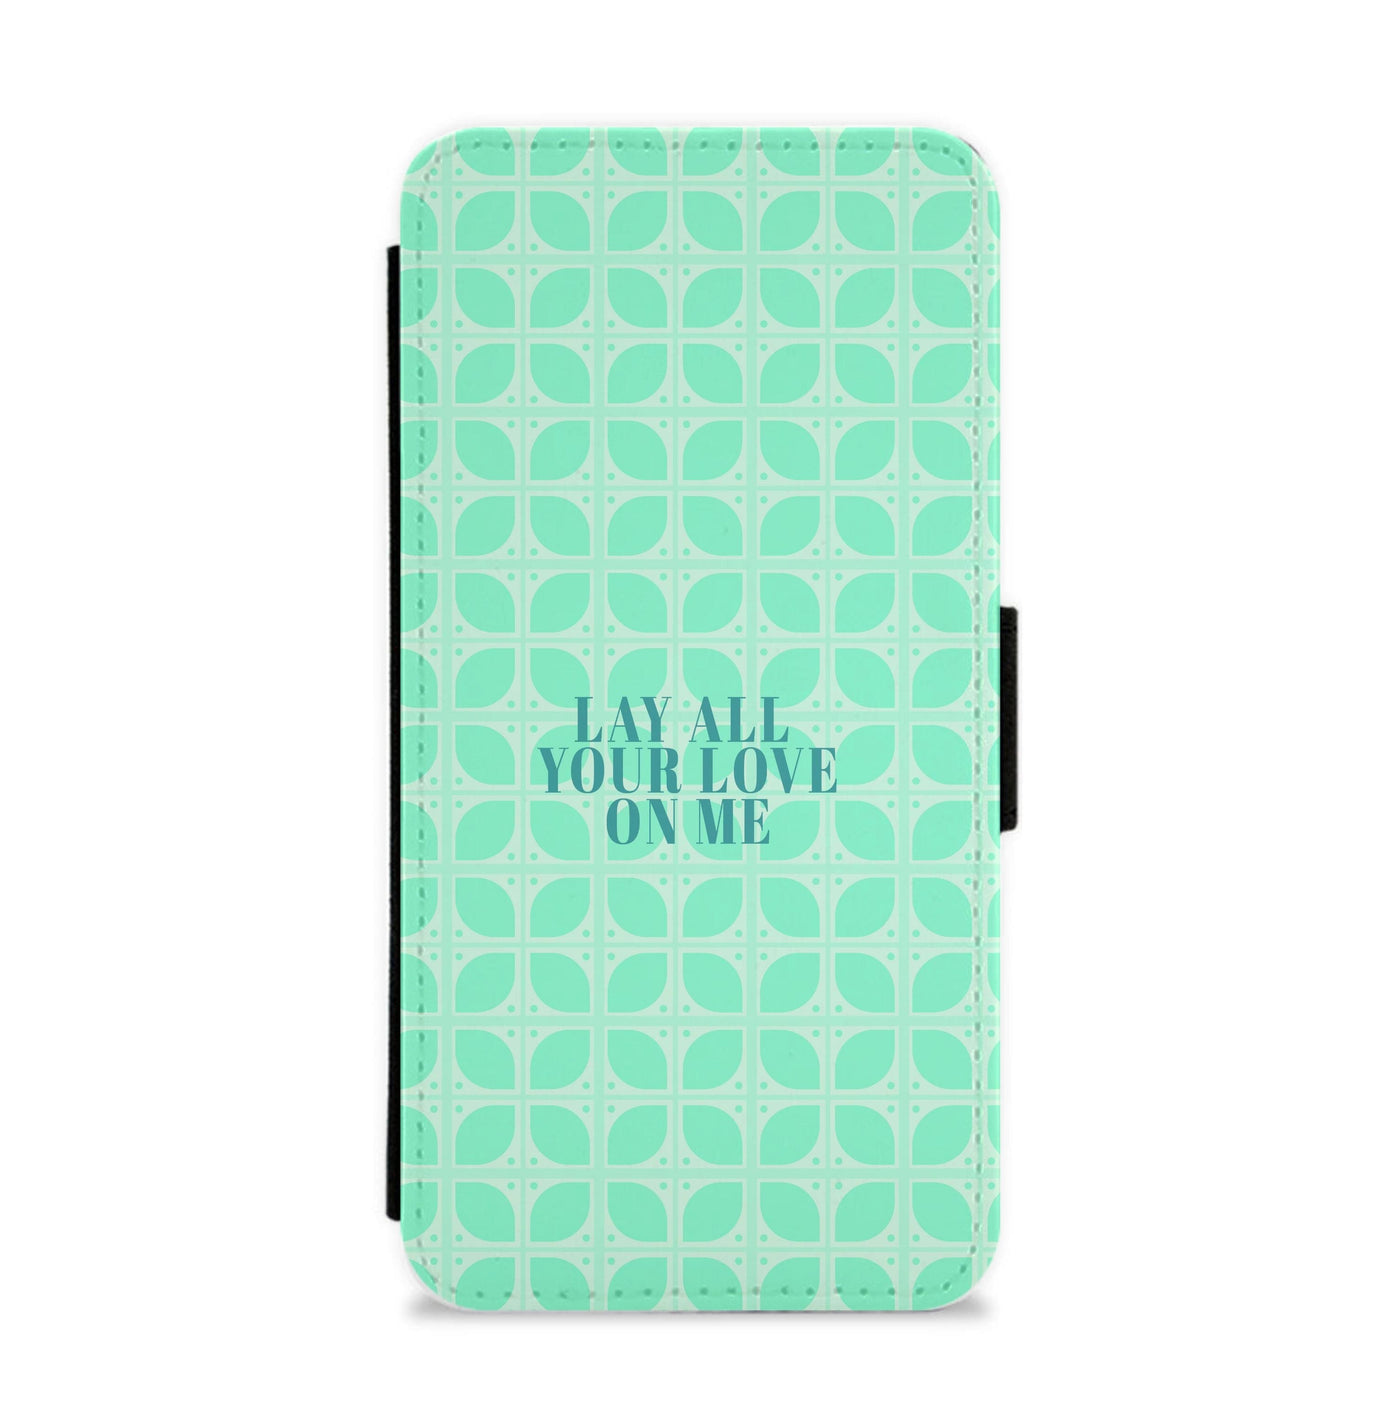 Lay All Your Love On Me - Mamma Mia Flip / Wallet Phone Case